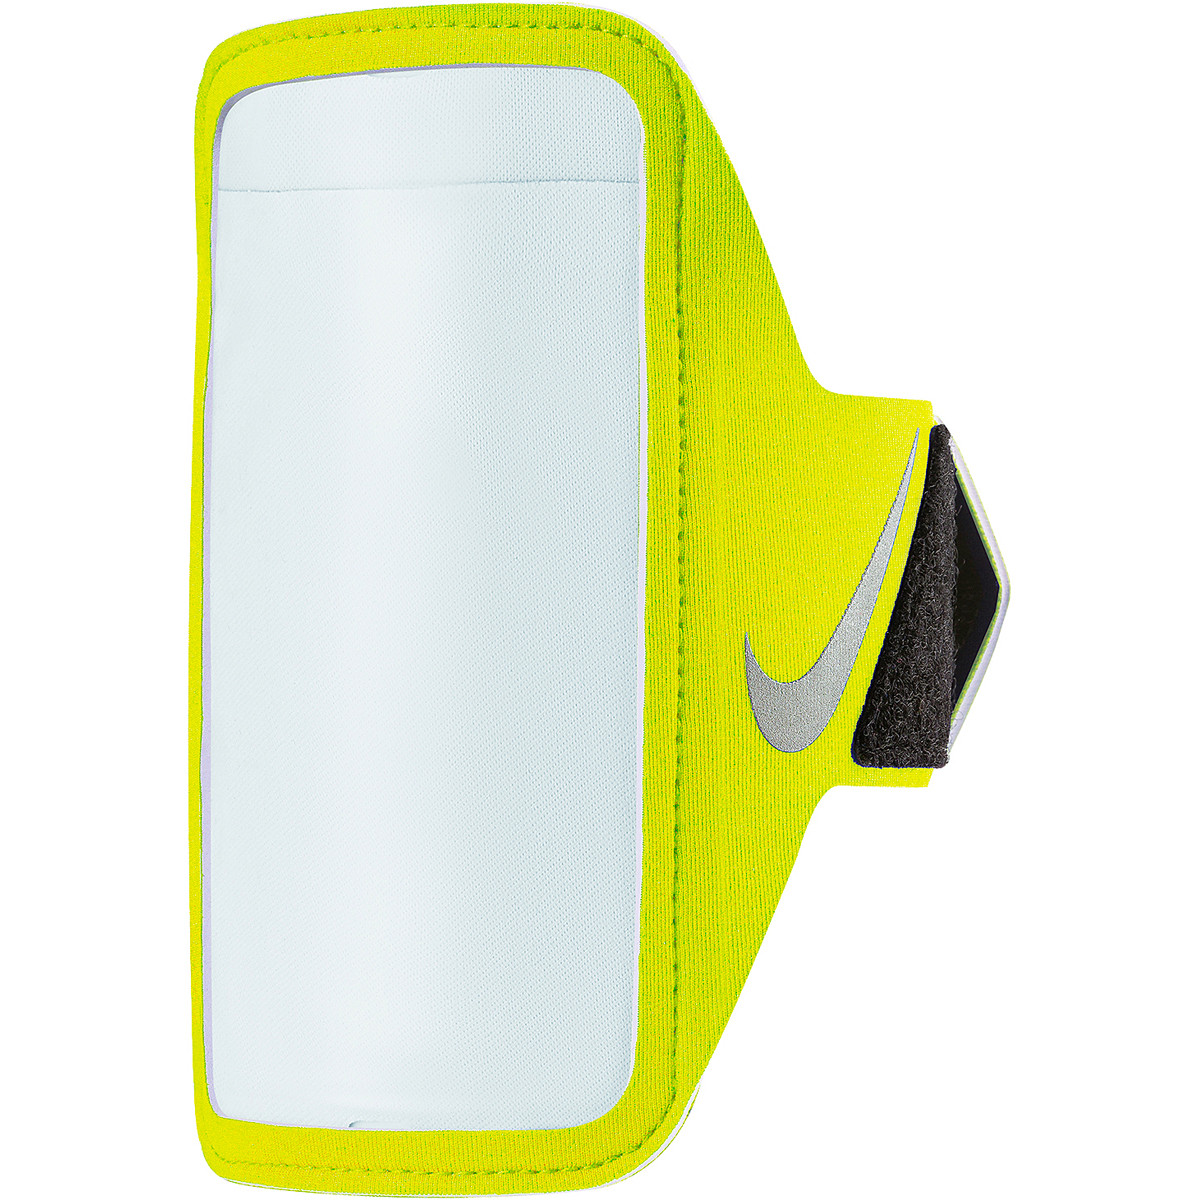 afsnit Hemmelighed deres NIKE LEAN RUNNING ARM BAND - NIKE - Training Accessories - Accessories |  Tennispro